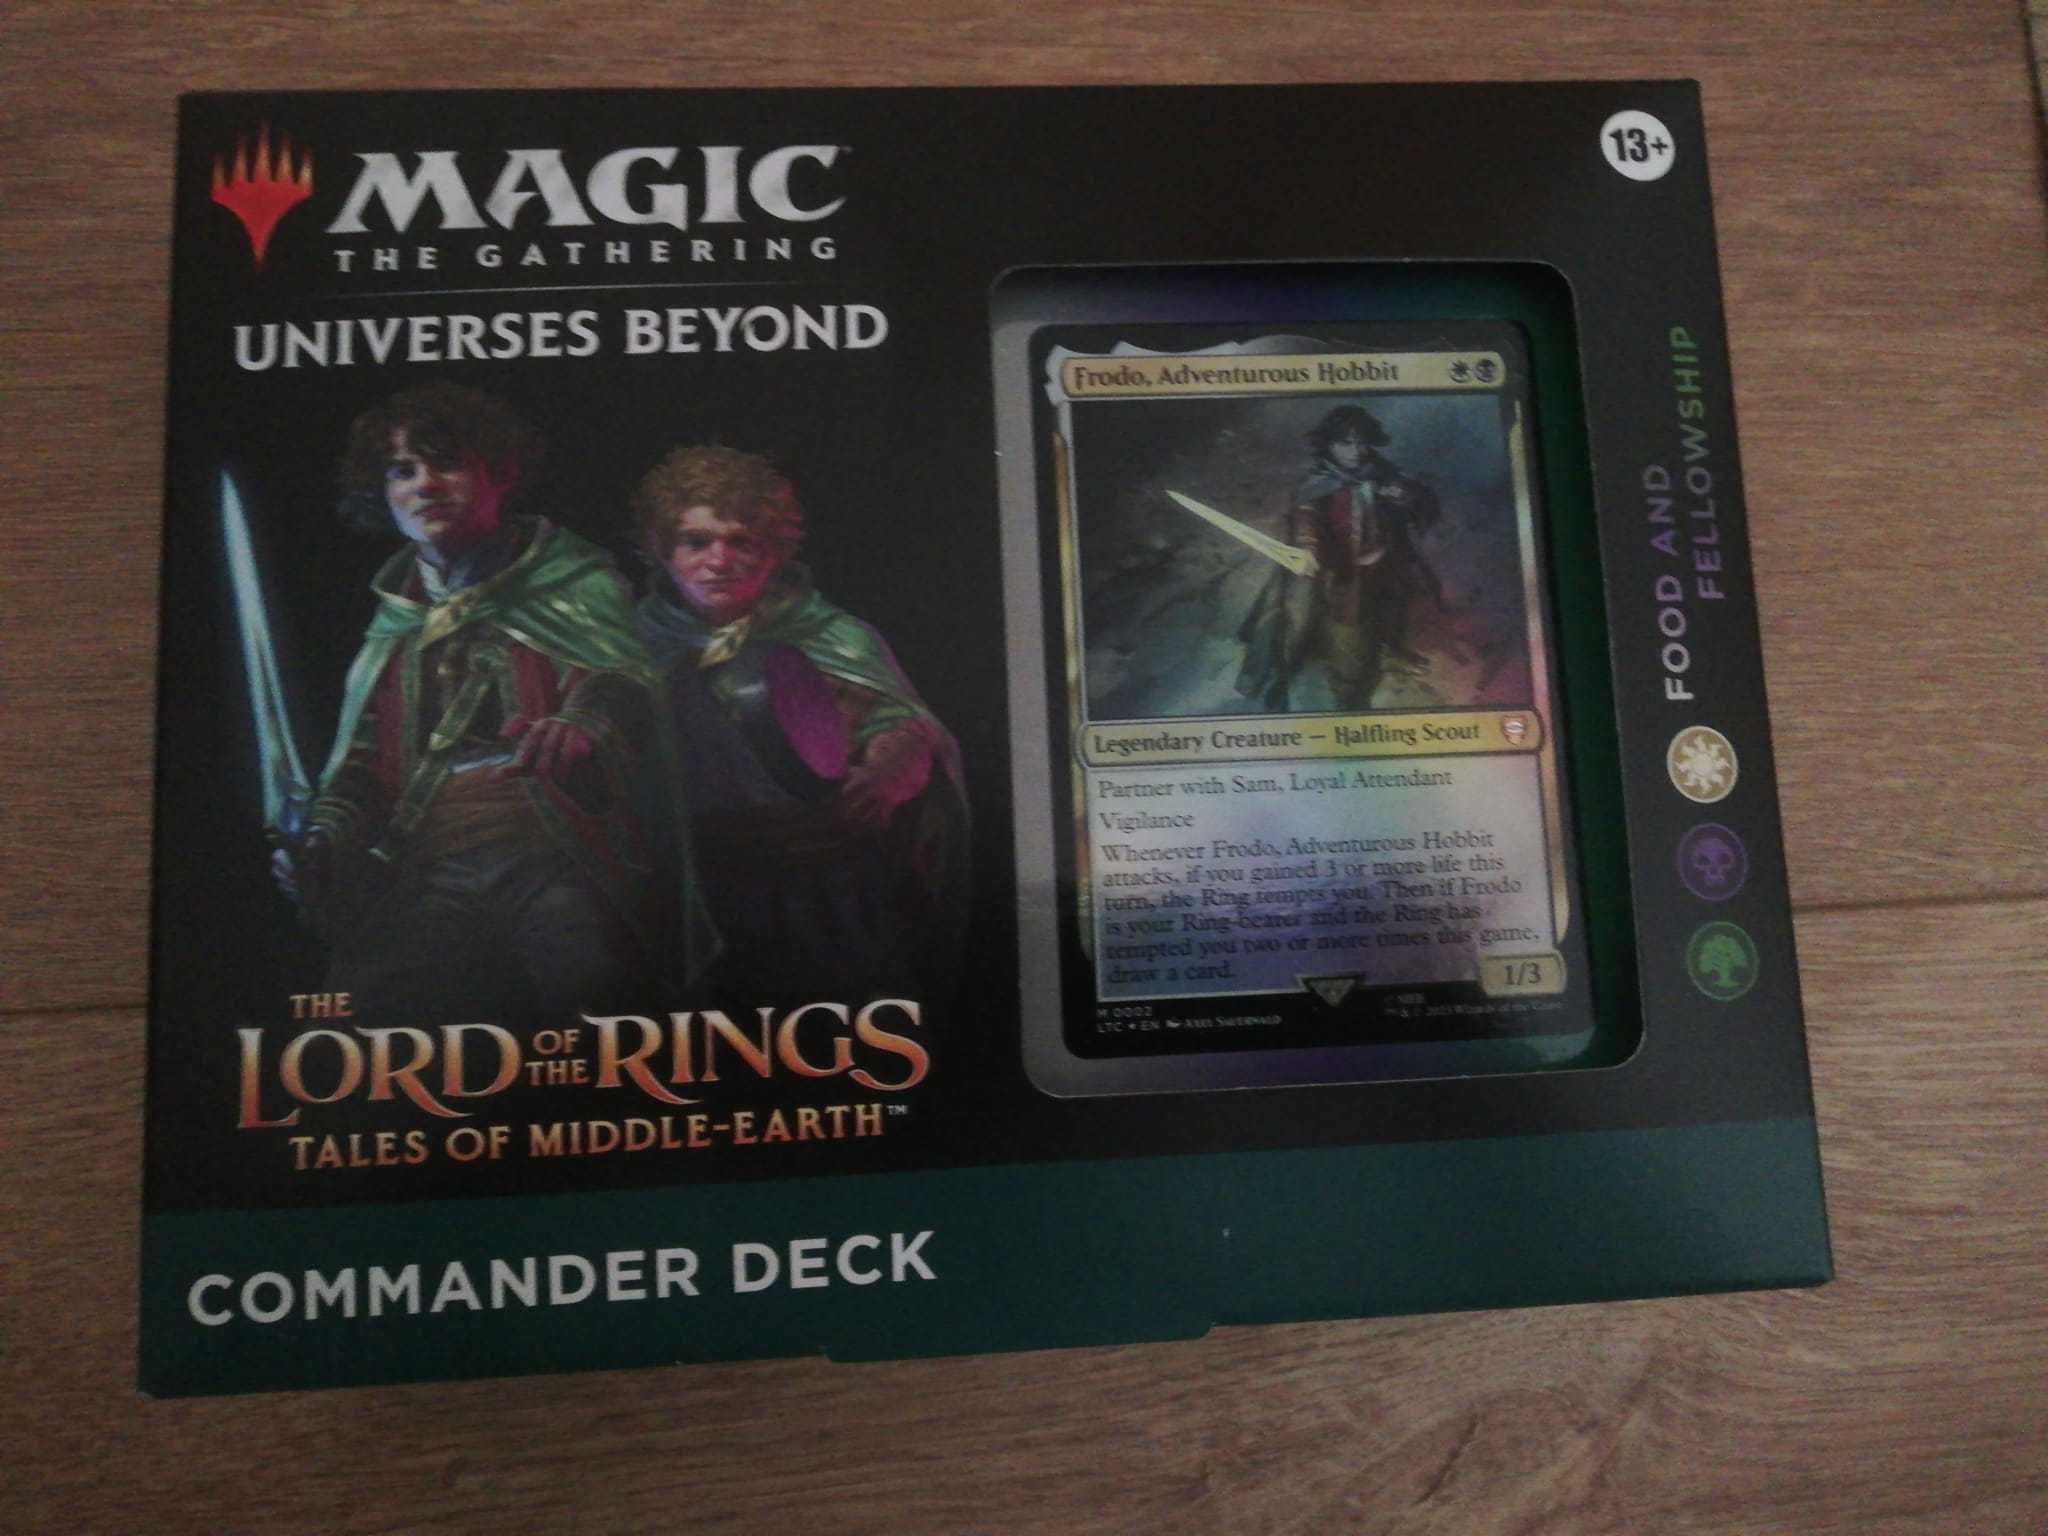 The Lord of the Rings: "Food and Fellowship" Commander Deck